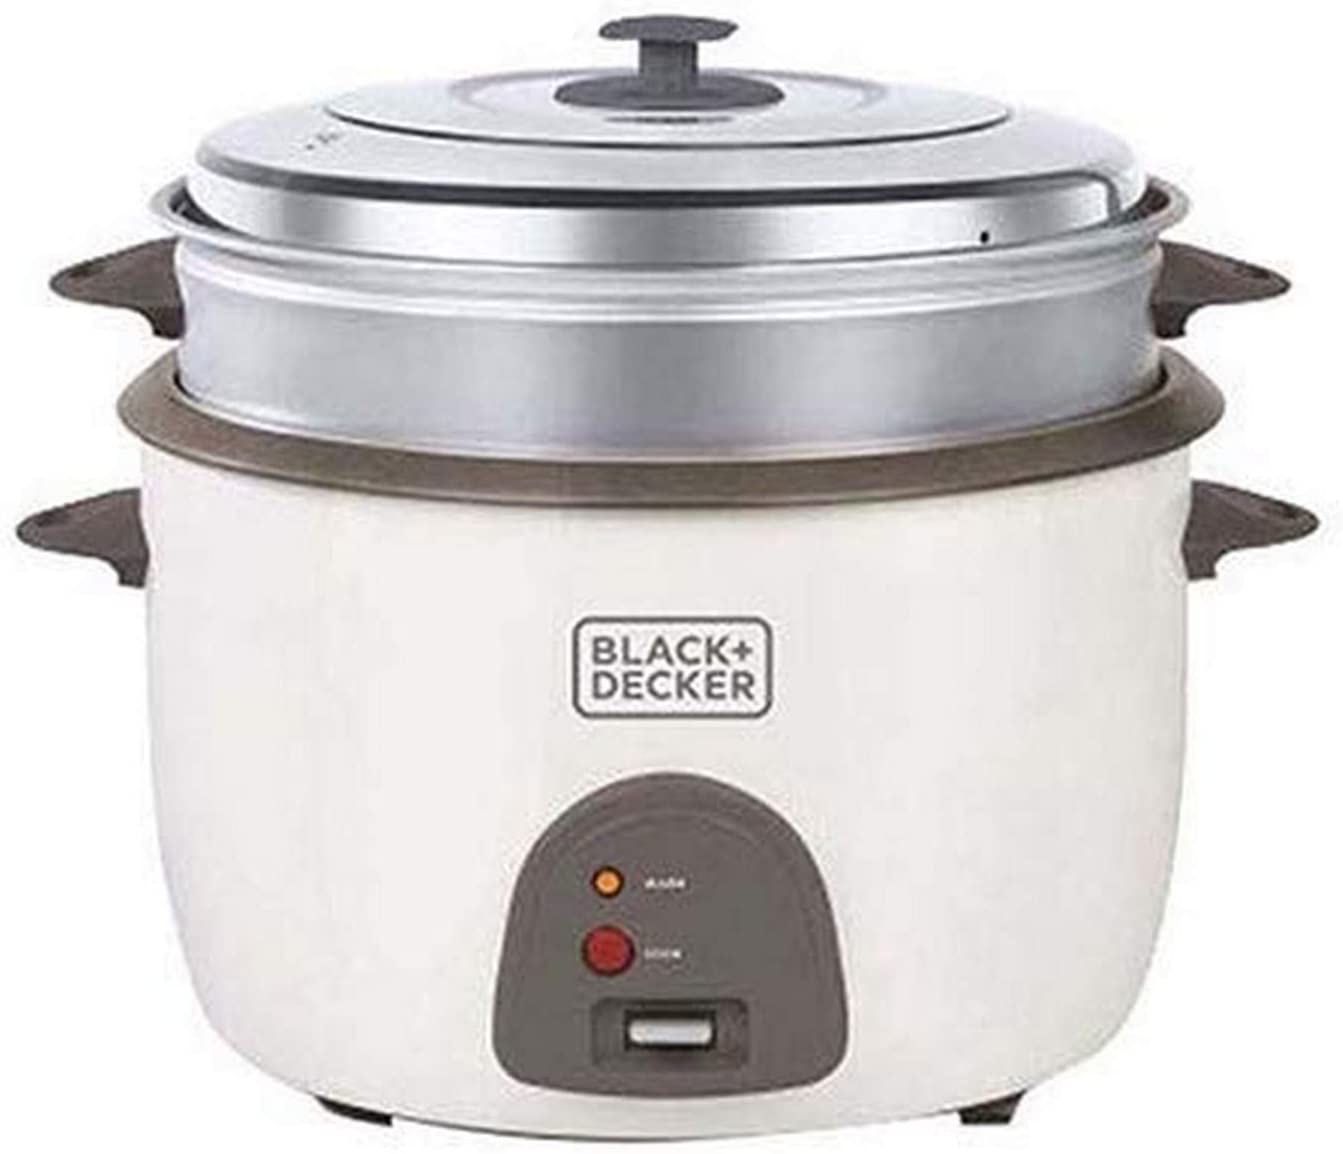 https://www.dvdoverseas.com/resize/Shared/Images/Product/Black-Decker-RC4500-220-Volt-25-Cup-Rice-Cooker-4-5L-Auto-Warm-Function-NON-USA/rc4500-2.jpg?bw=1000&w=1000&bh=1000&h=1000